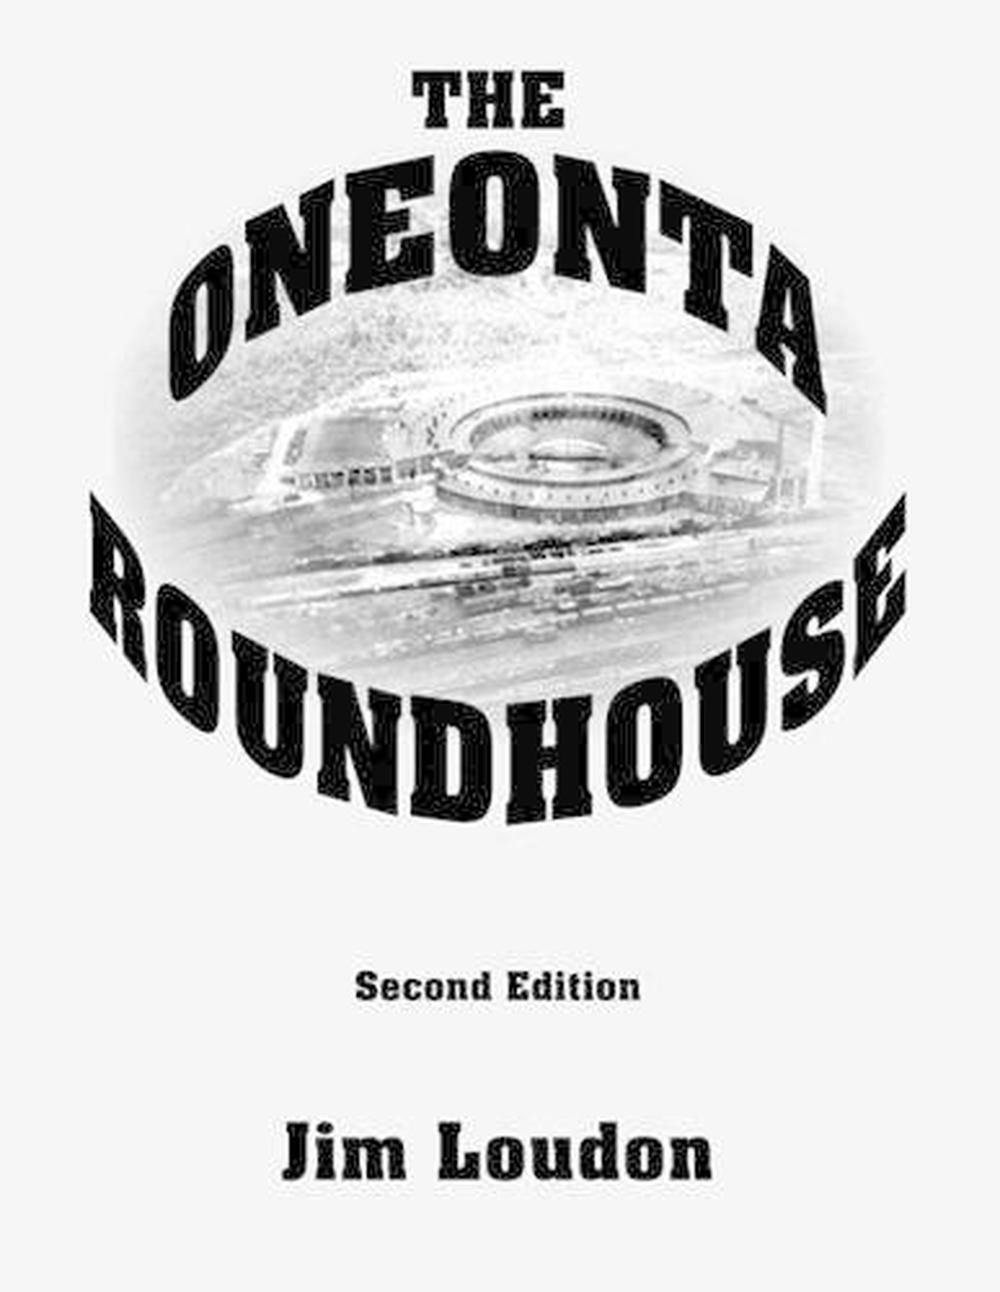 the roundhouse book review